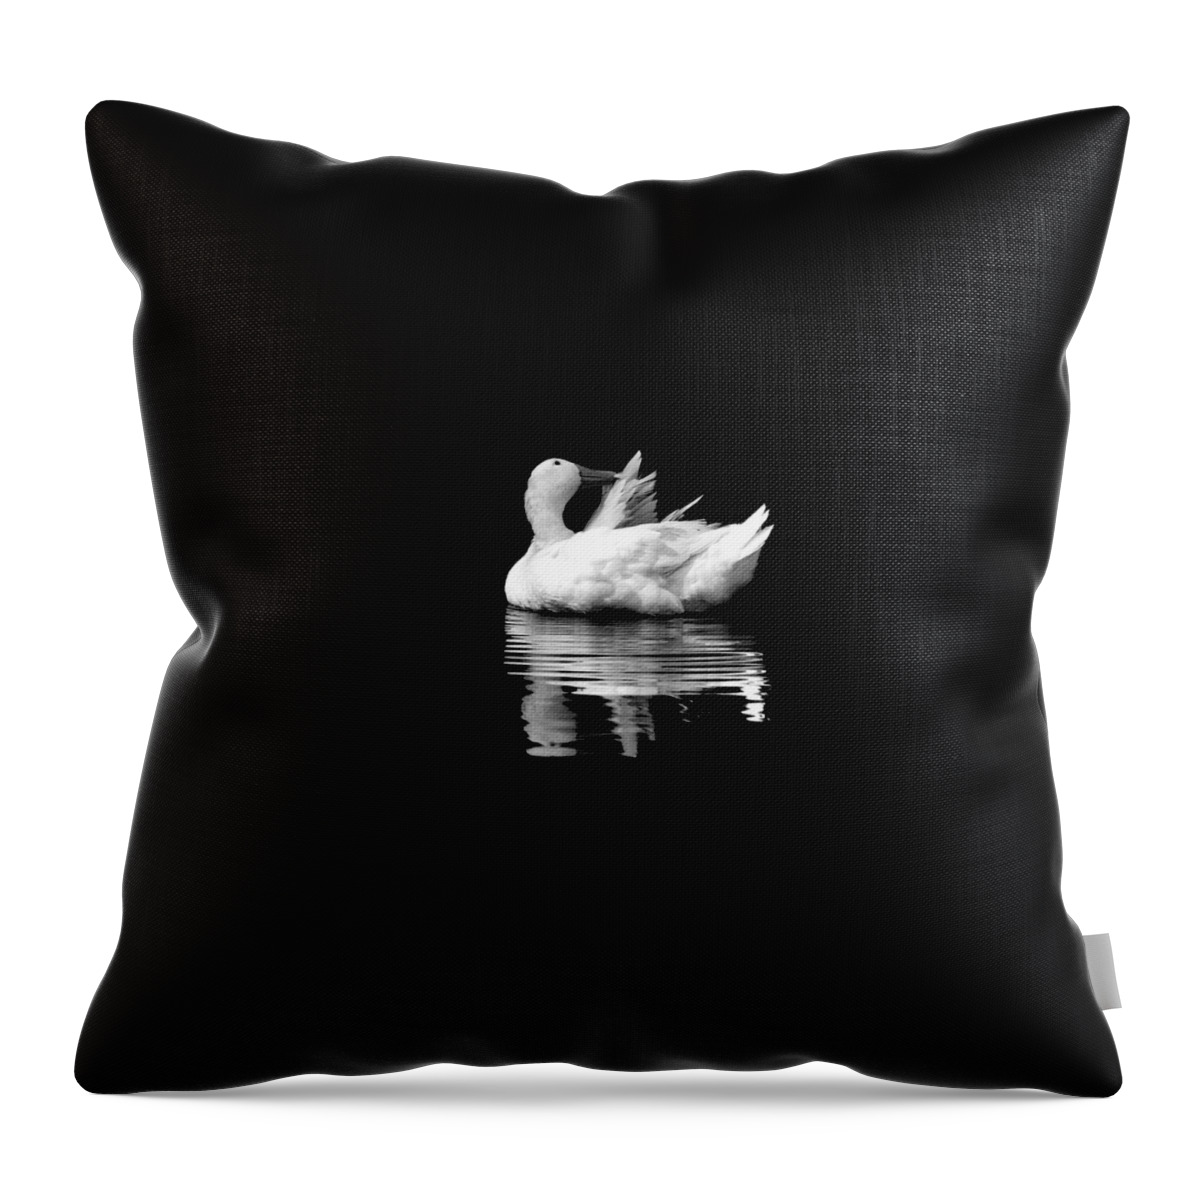 Animals Throw Pillow featuring the photograph On The Pond by Charlotte Schafer